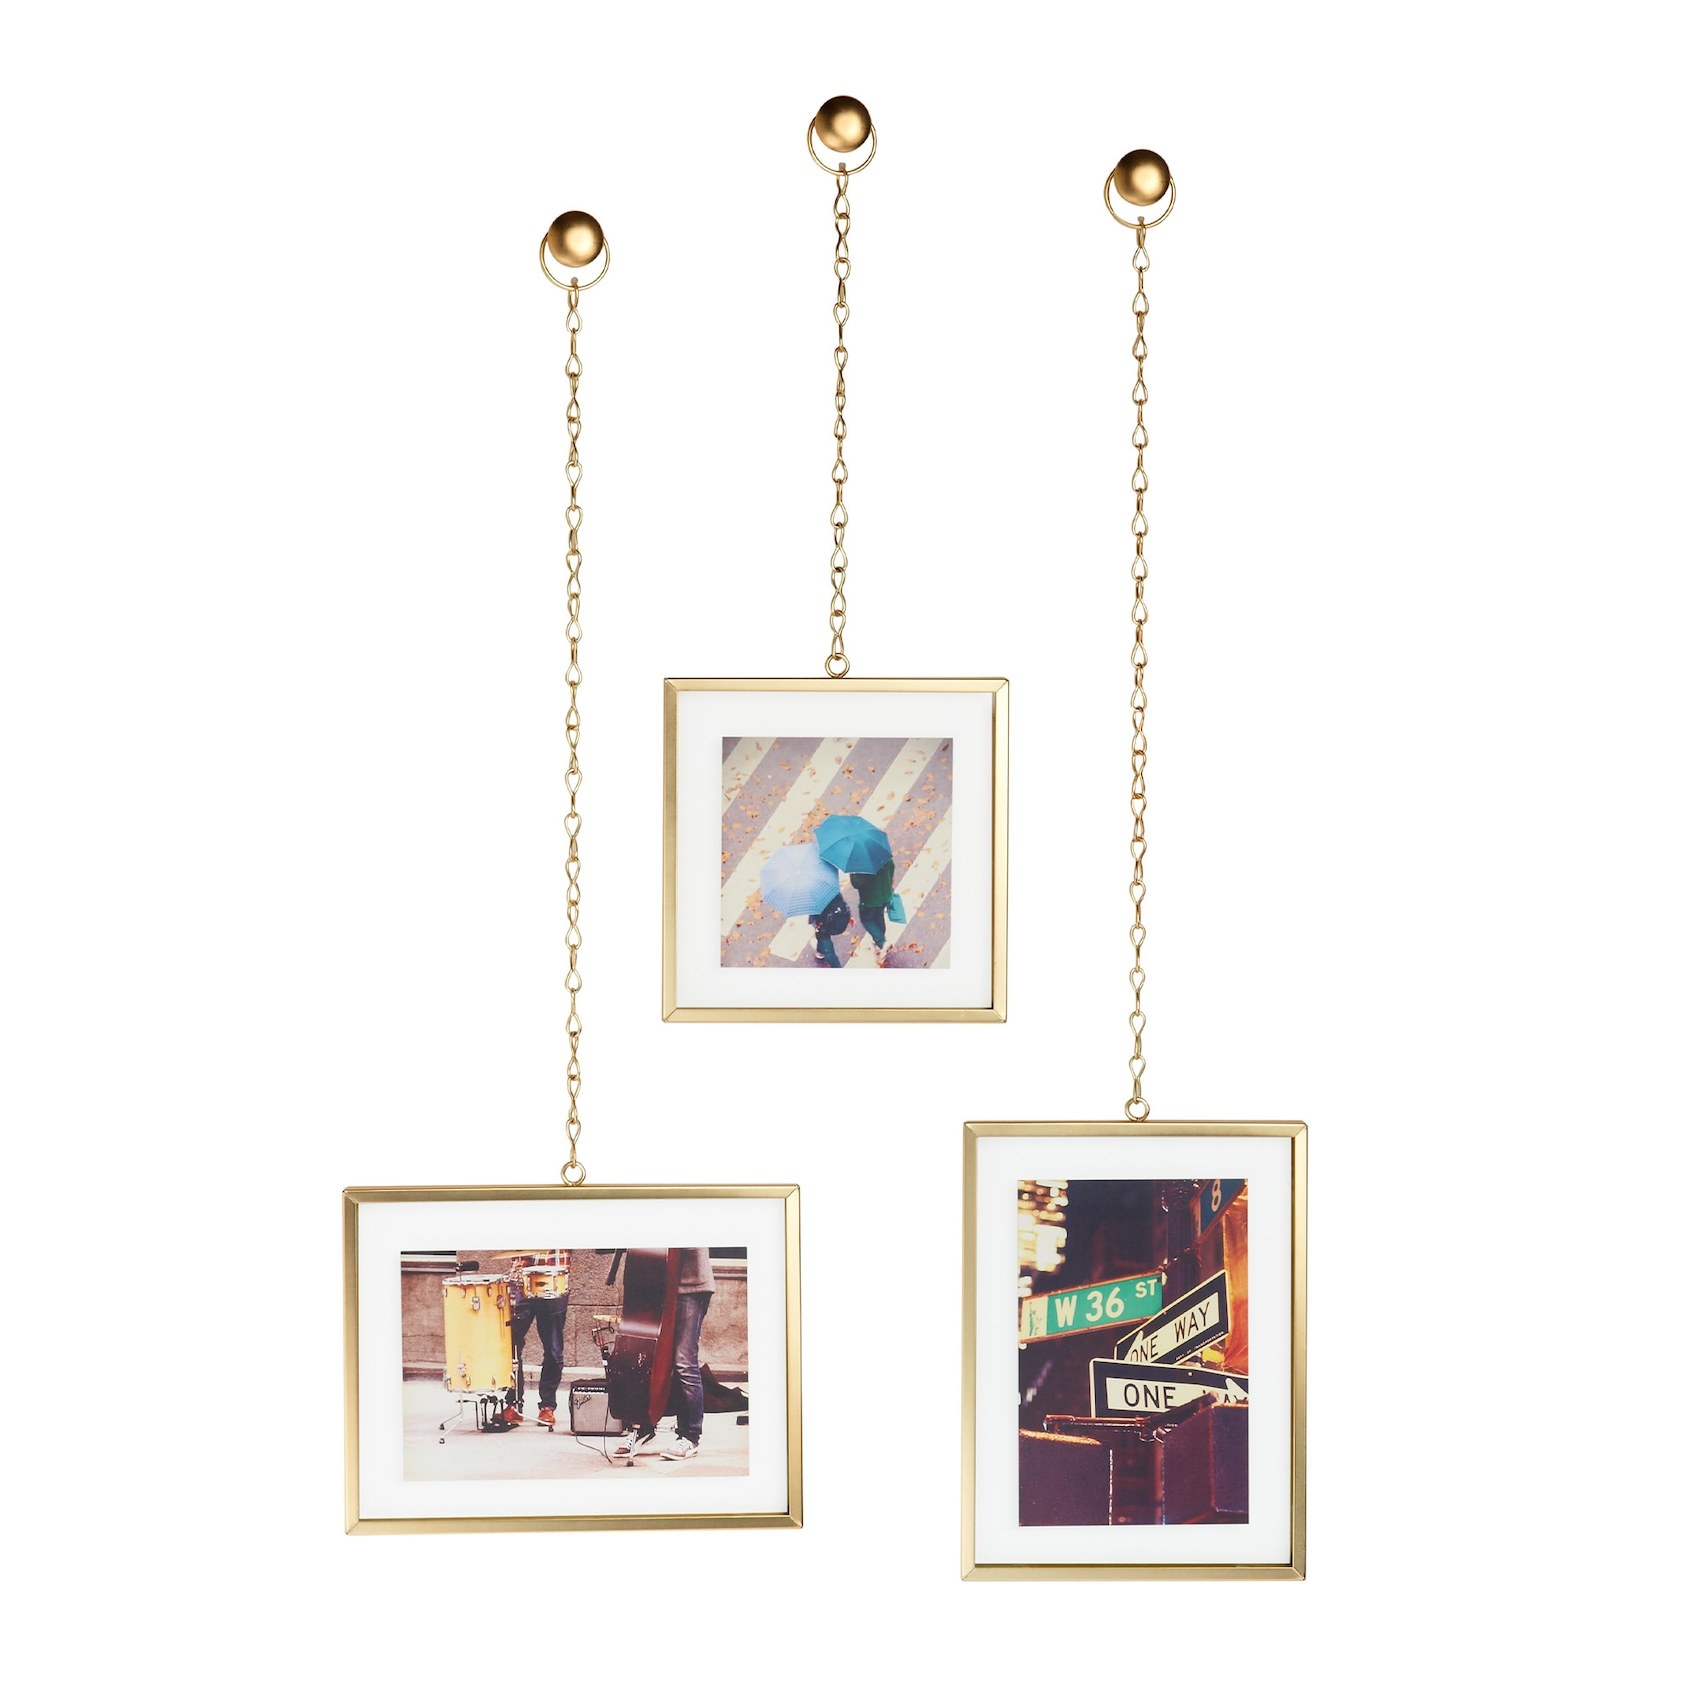 The three photos in gold frames hanging from matching gold knobs mounted to a wall